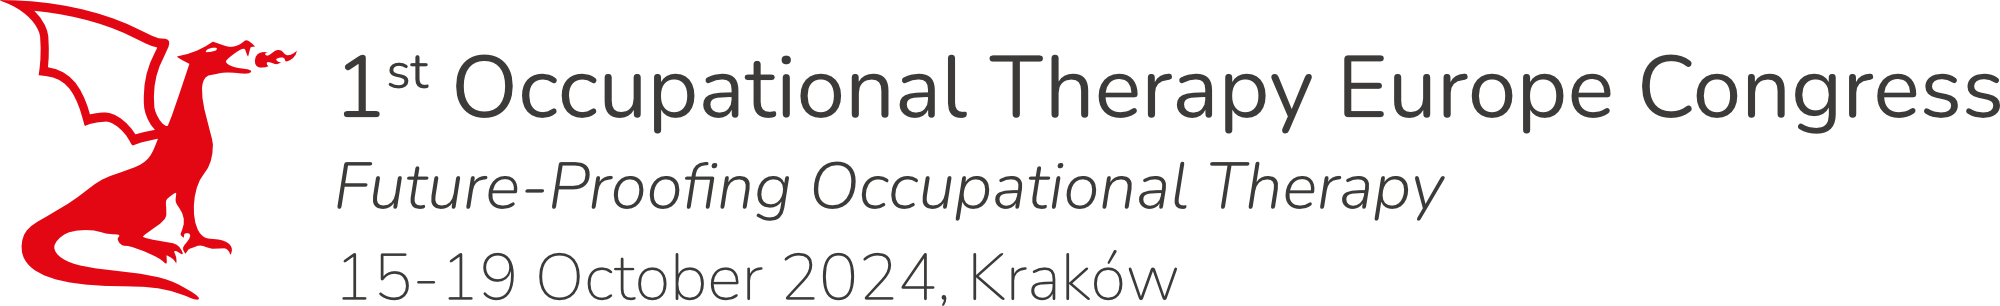 1st Occupational Therapy Europe Congress 2024 || Poland, Krakow